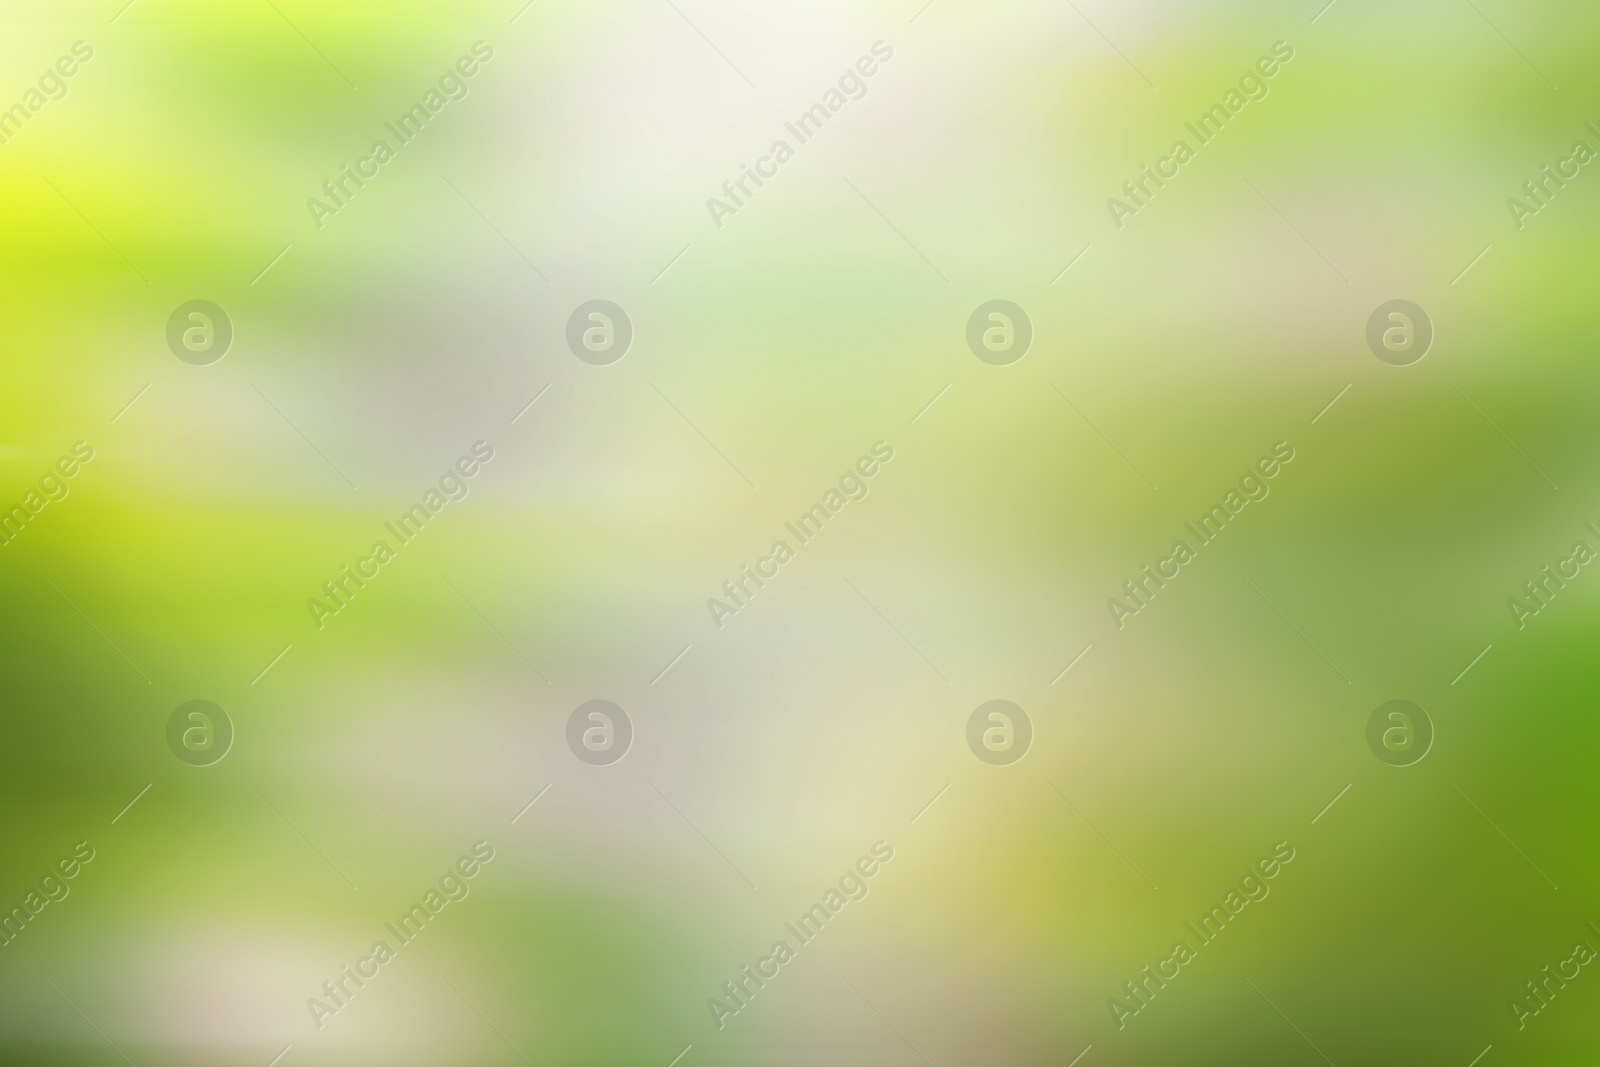 Image of Blurred view of abstract bright green background